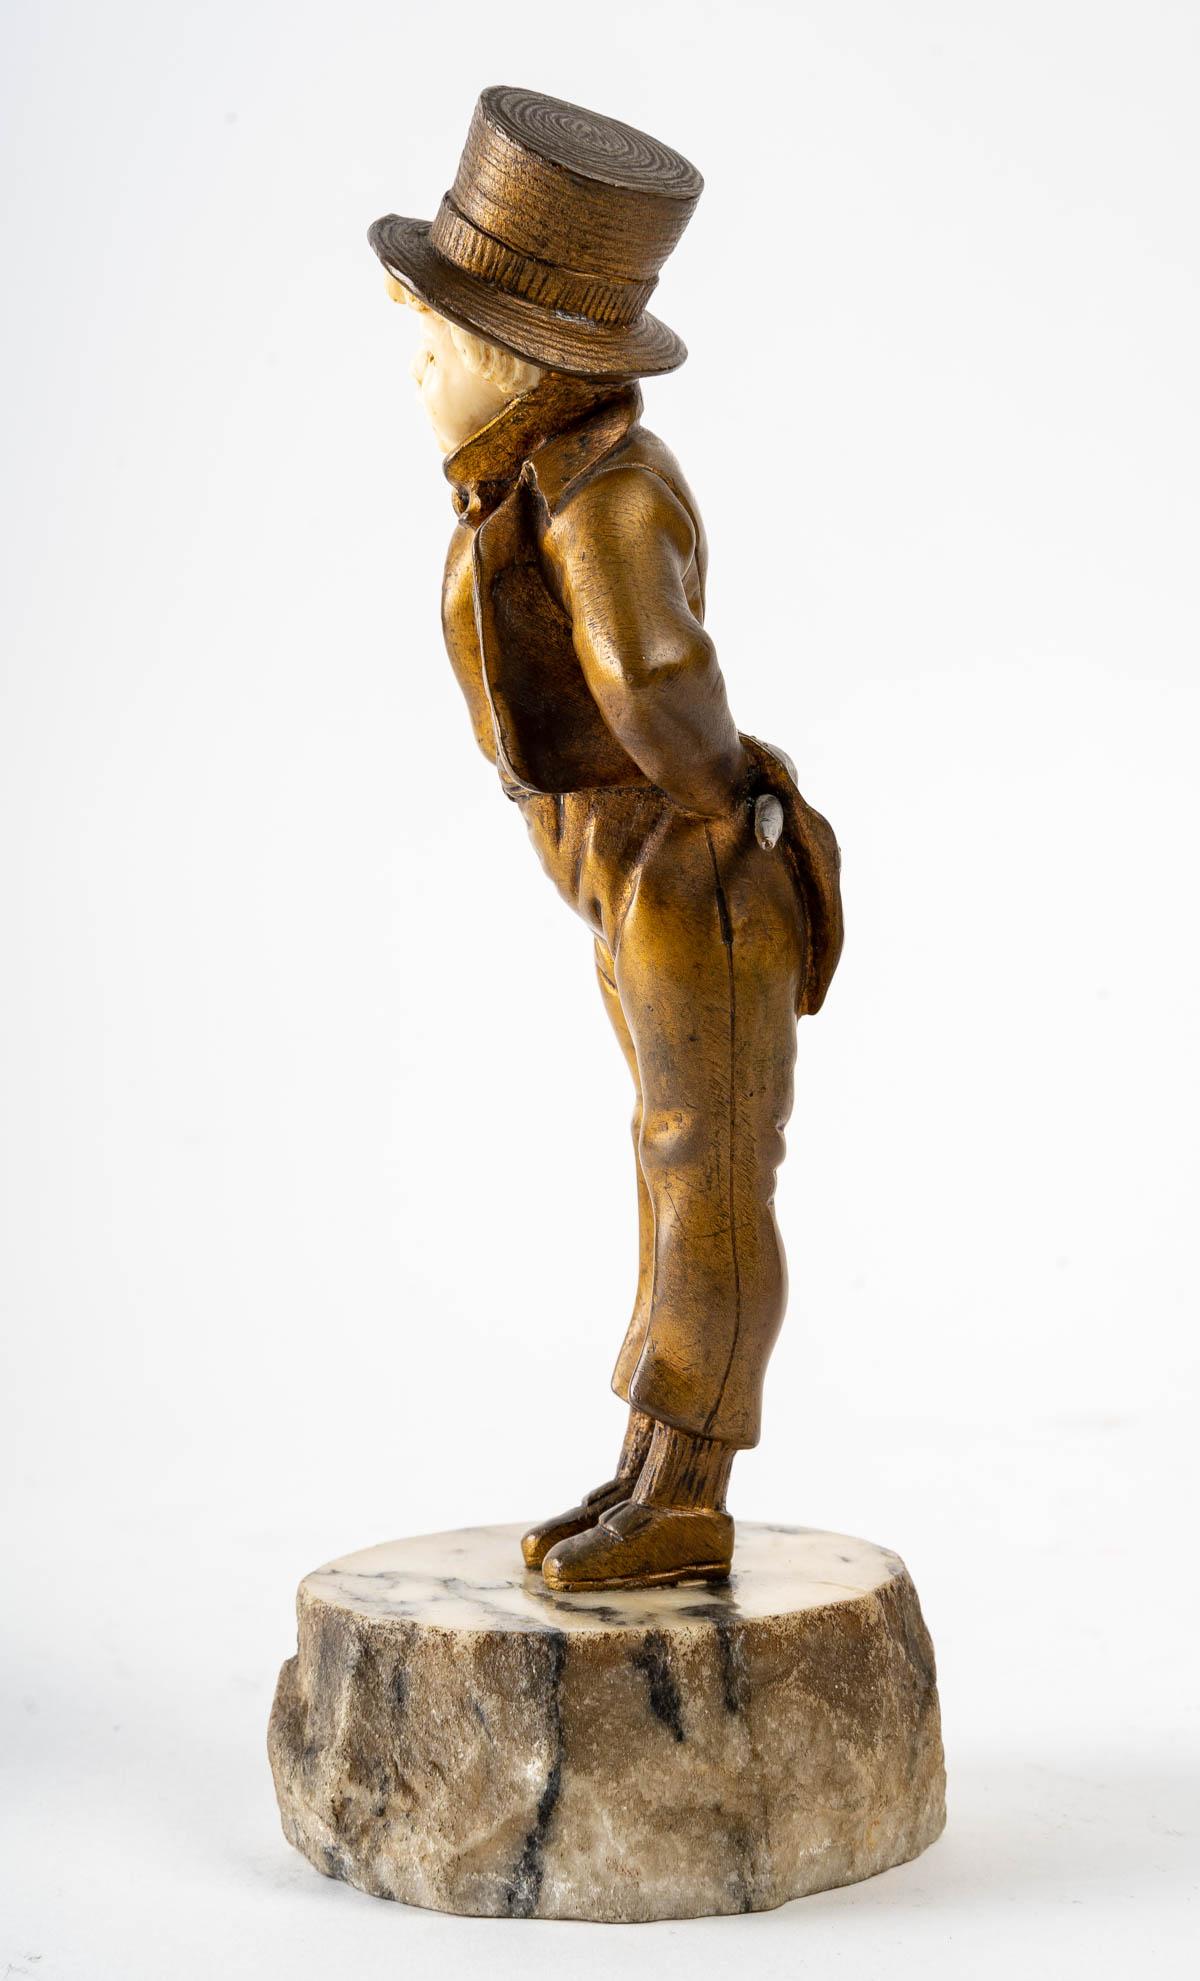 Small sculpture by Georges Omerth (1895 - 1925)
Measures: H: 20 cm, W: 7 cm, D: 7 cm.